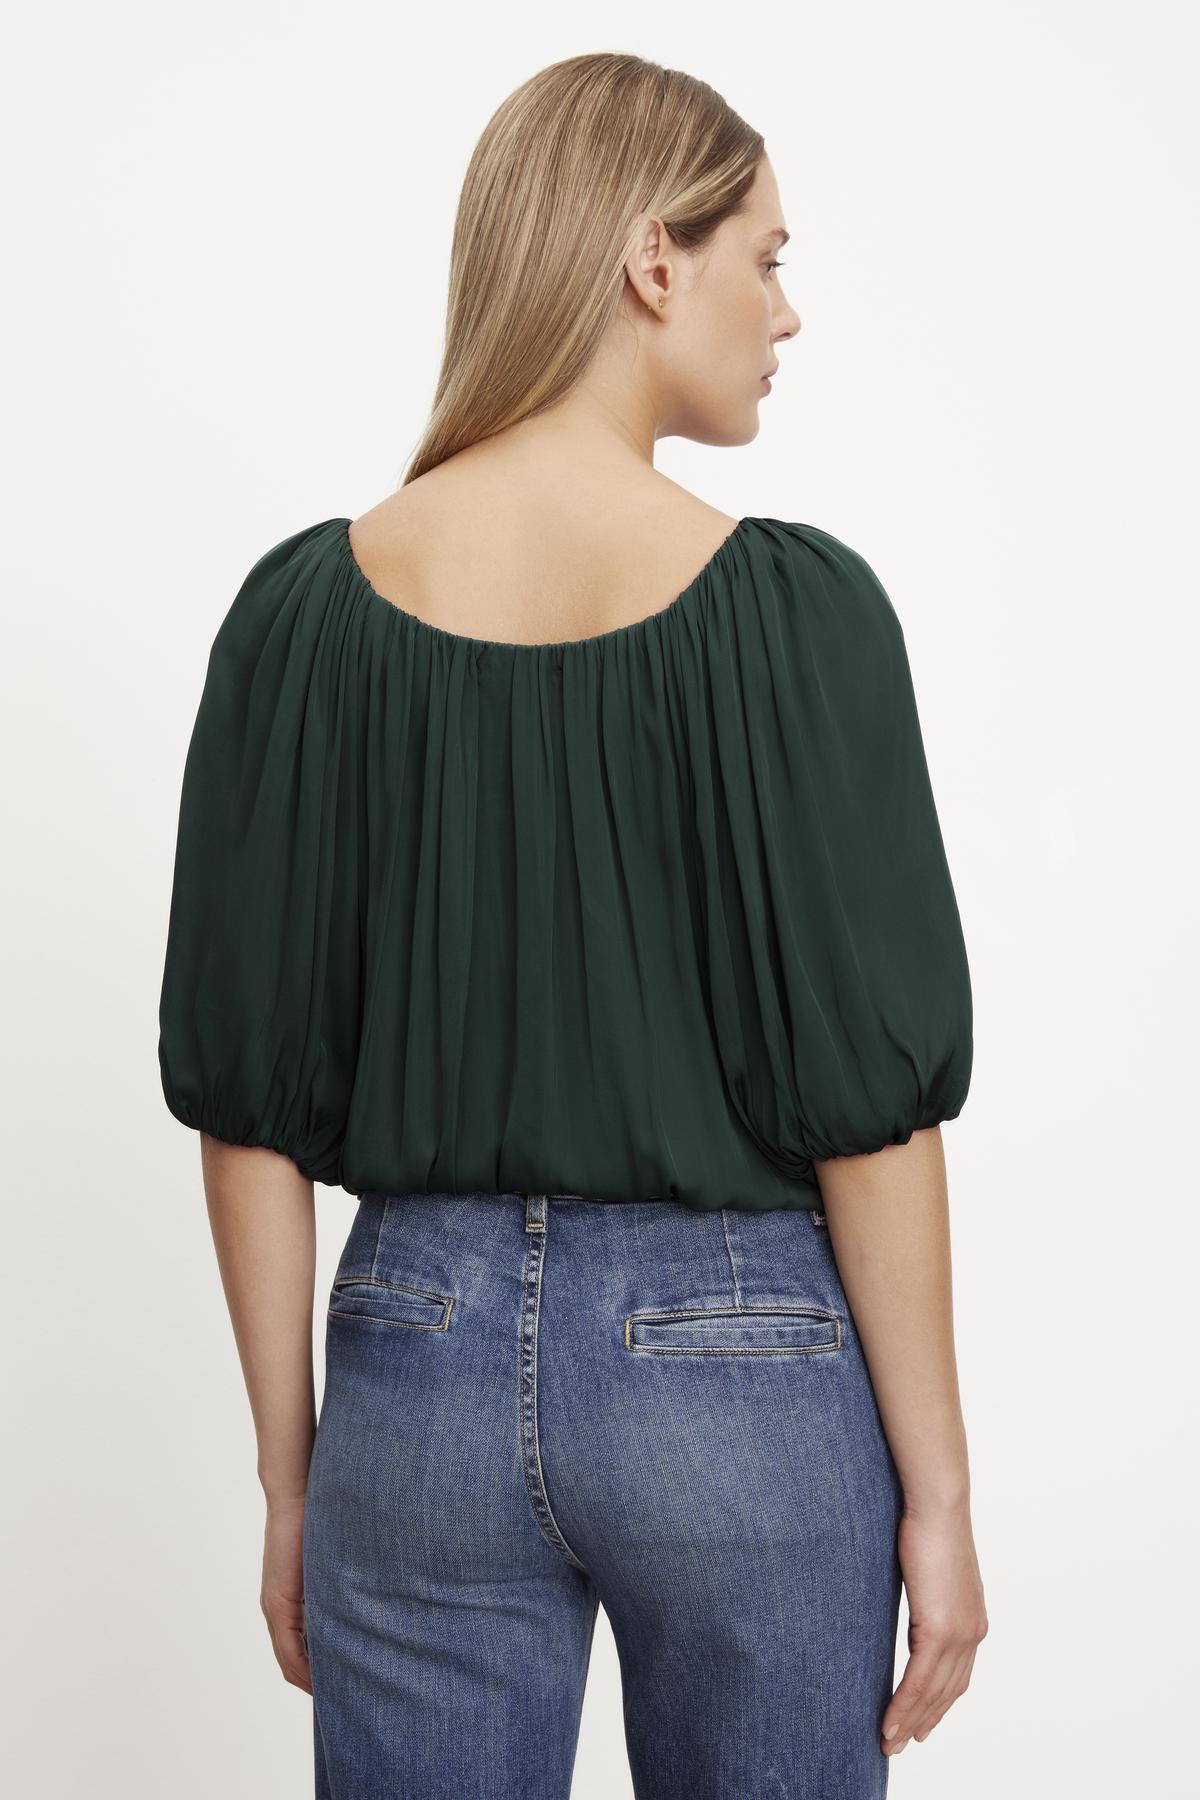 The back view of a woman wearing jeans and a Velvet by Graham & Spencer TAMI SATIN PUFF SLEEVE TOP.-35654471221441